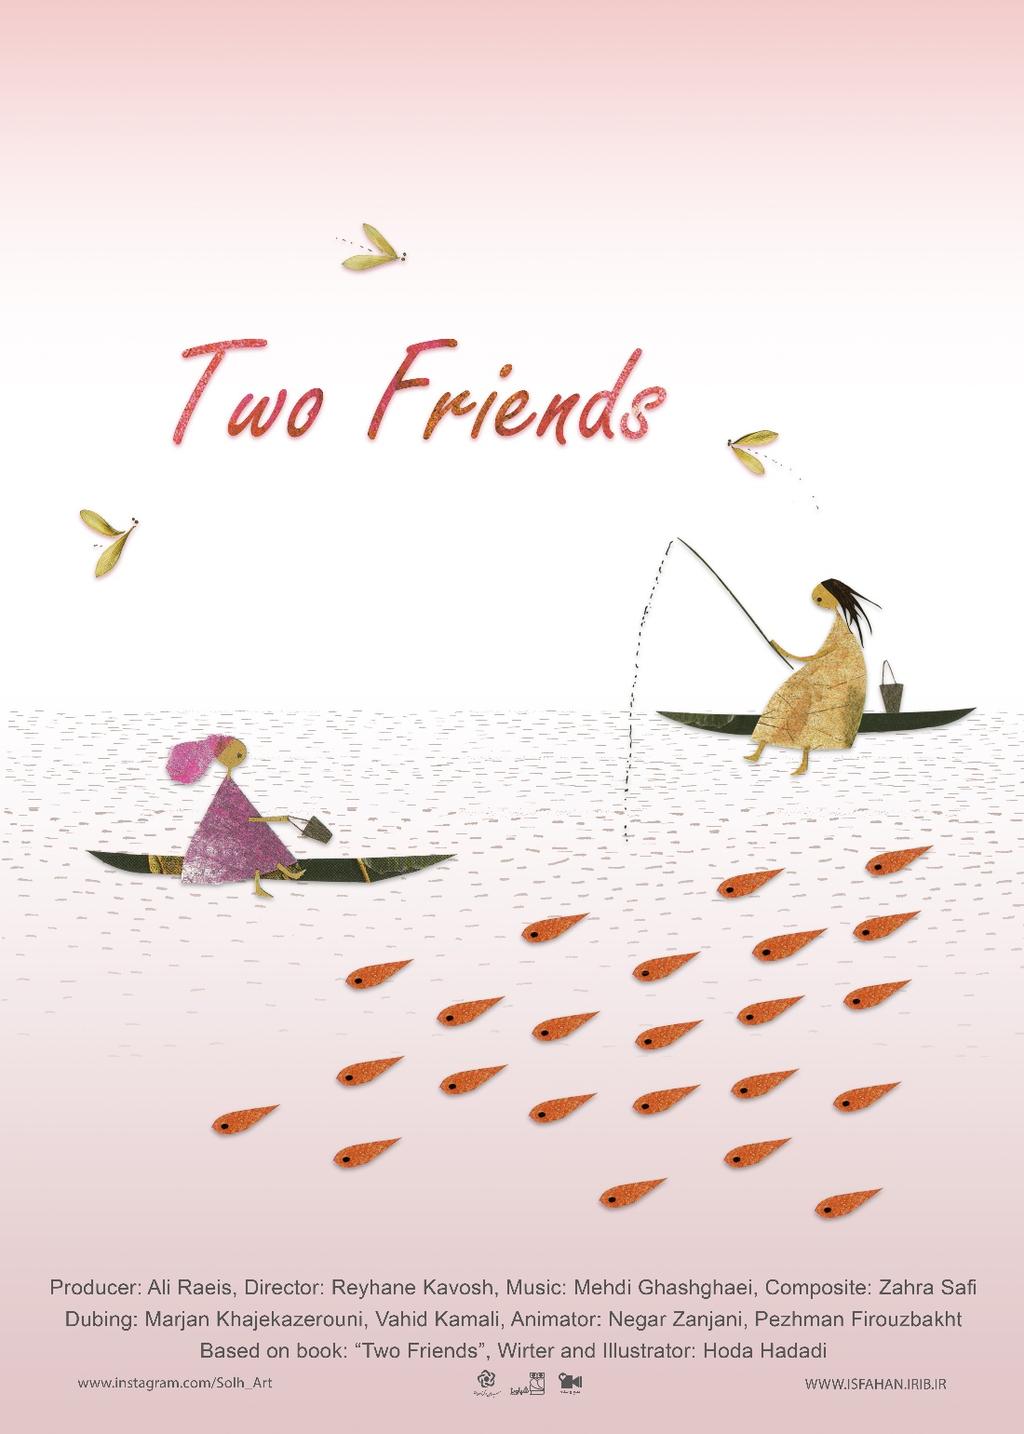 2. Two Friends Synopsis: Two friend are walking in a forest.